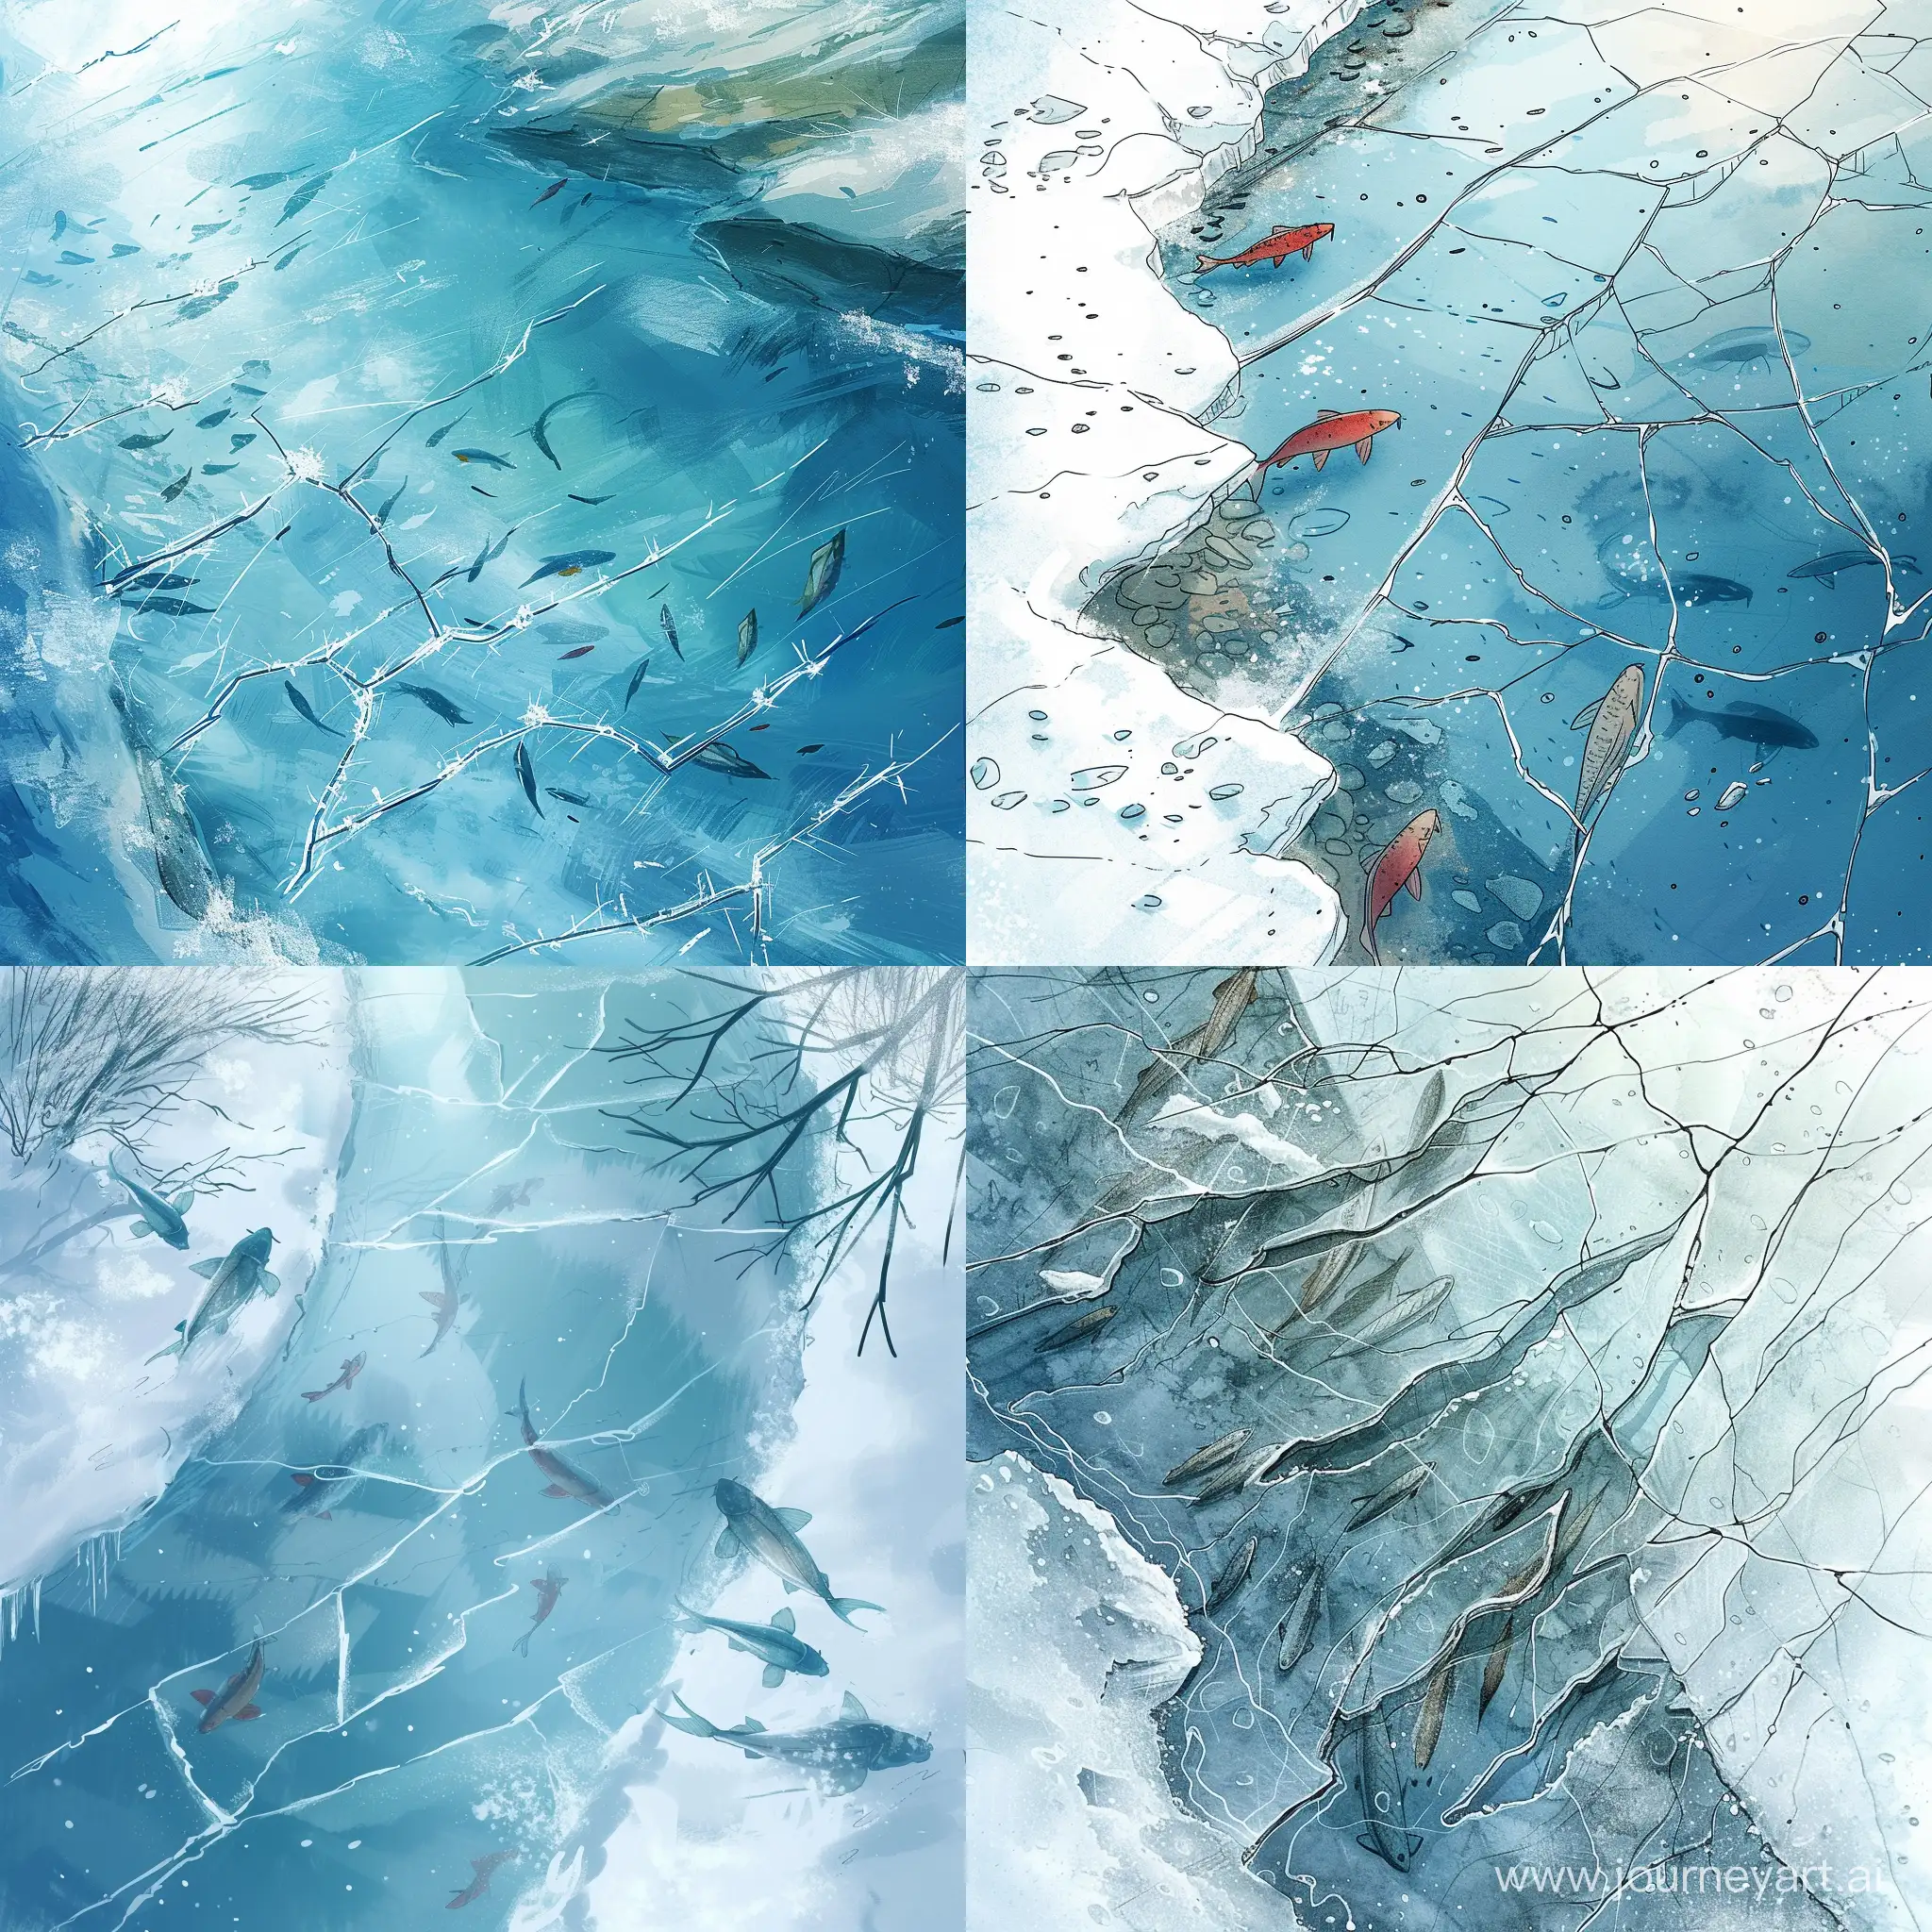 Enchanting-River-Scene-Crystal-Clear-Ice-Submerged-Fish-and-Whimsical-Snow-Patterns